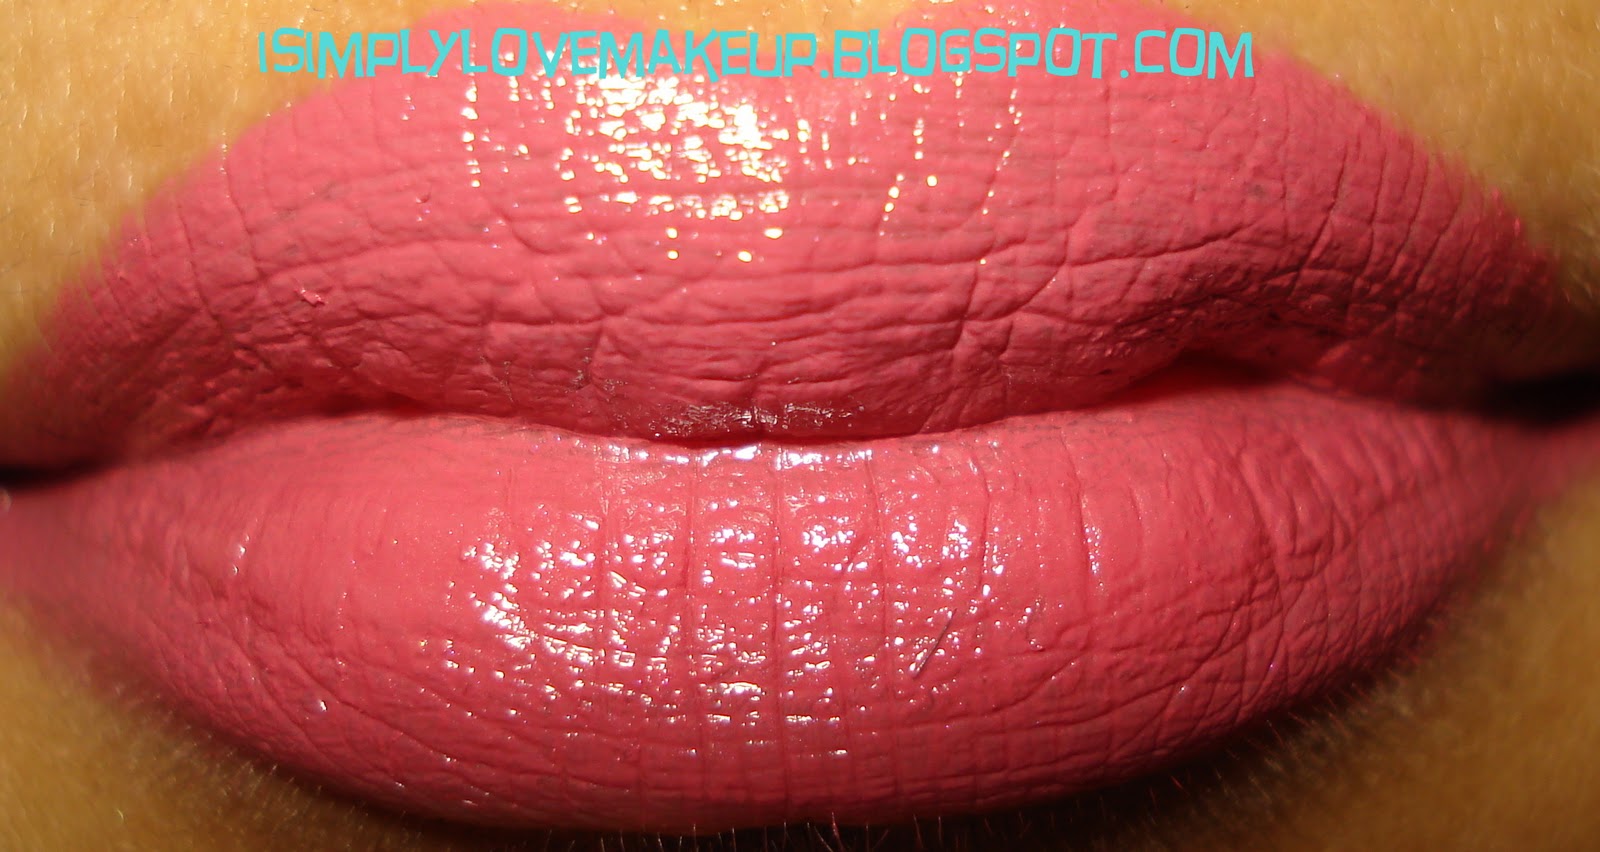 Review Lotd Mac Amplified Lipstick In Craving